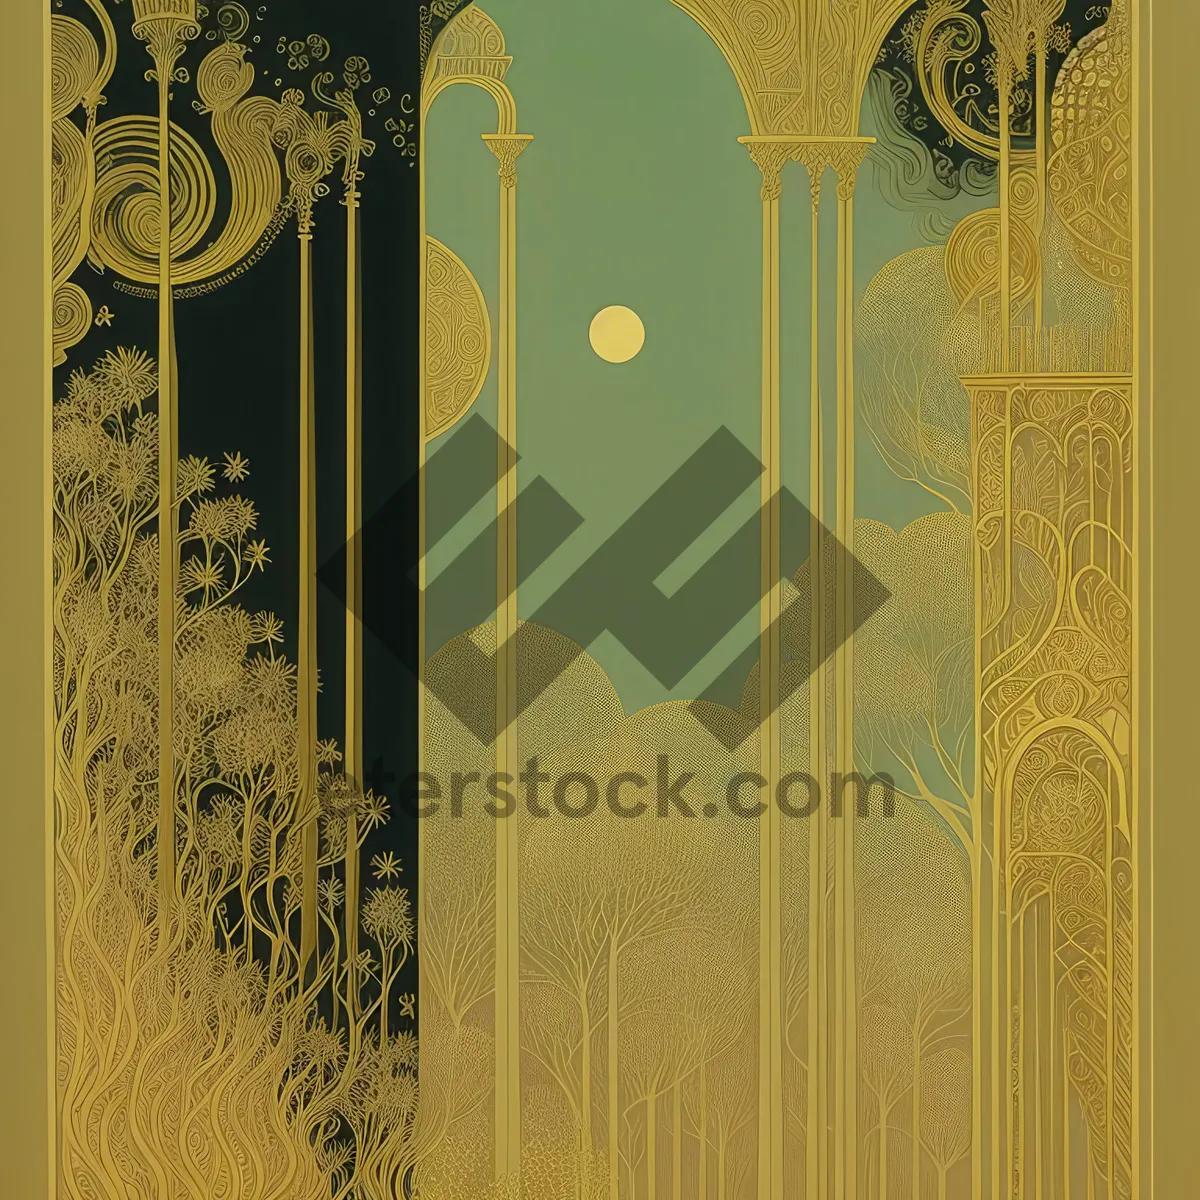 Picture of Elegant Vintage Floral Pattern with Gold Accents